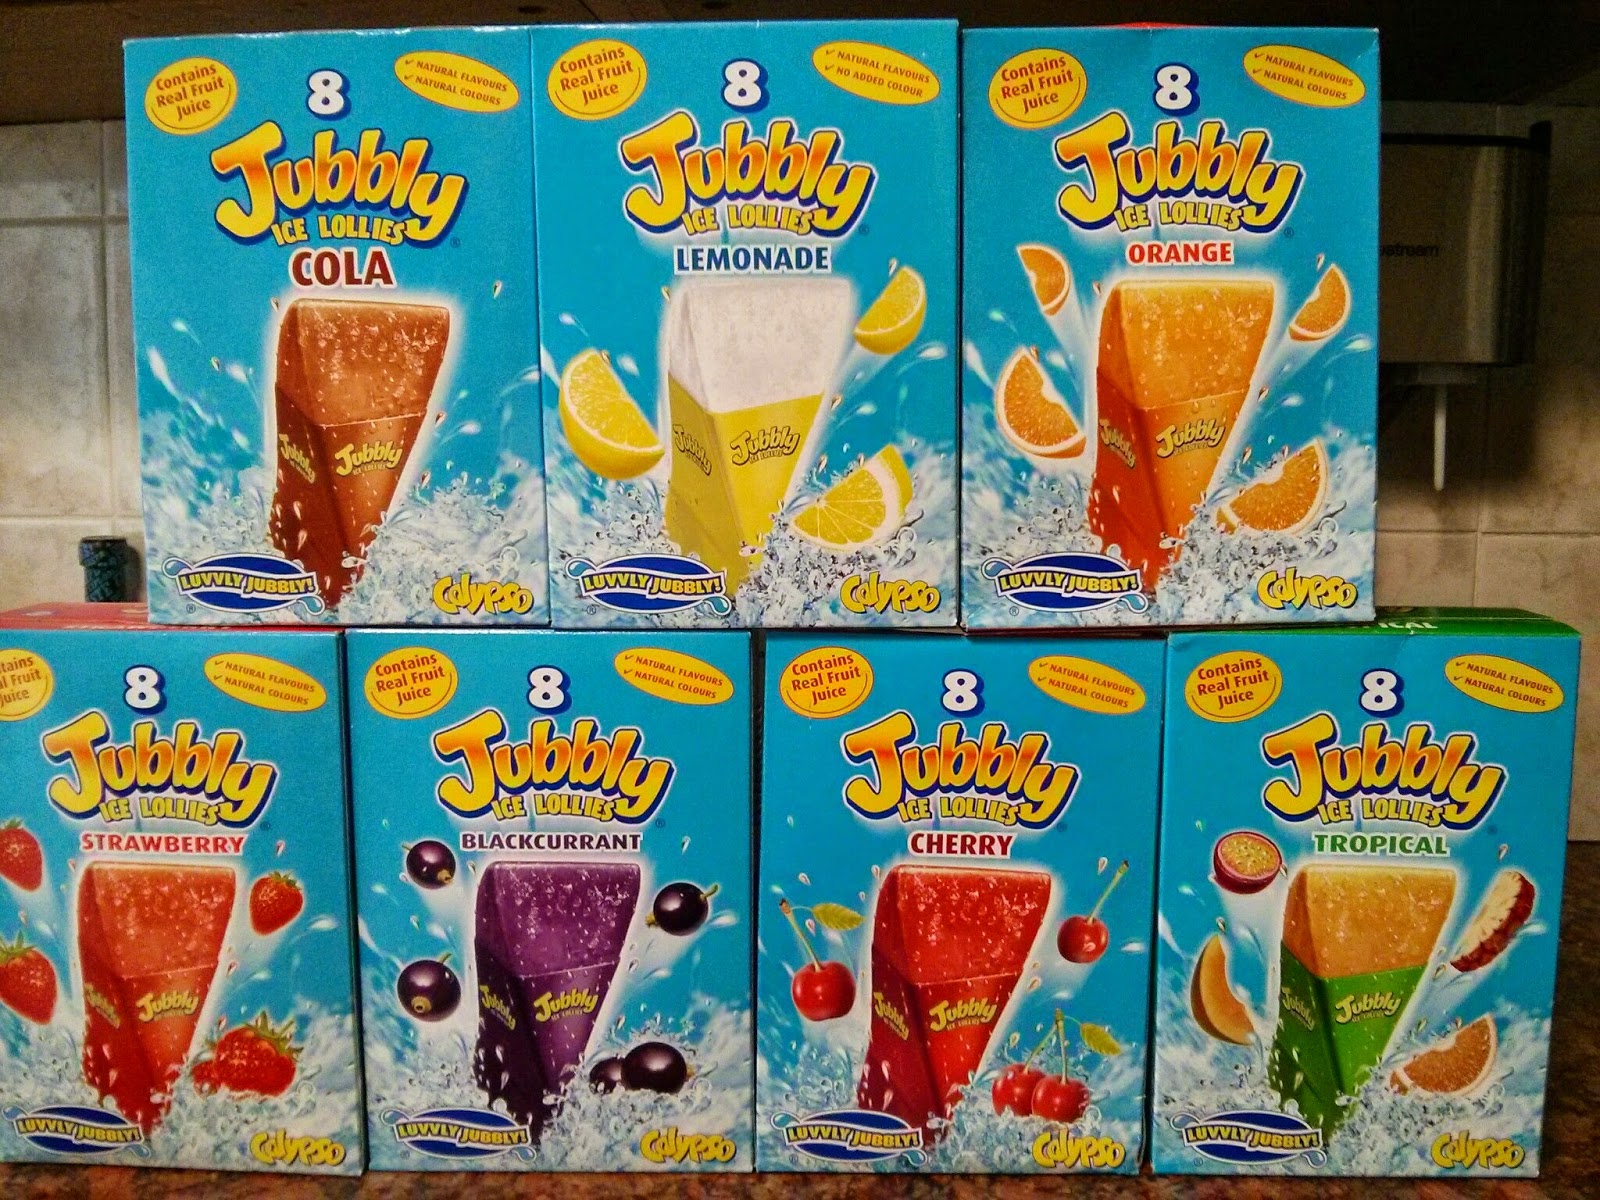 Jubbly Ice Lollies